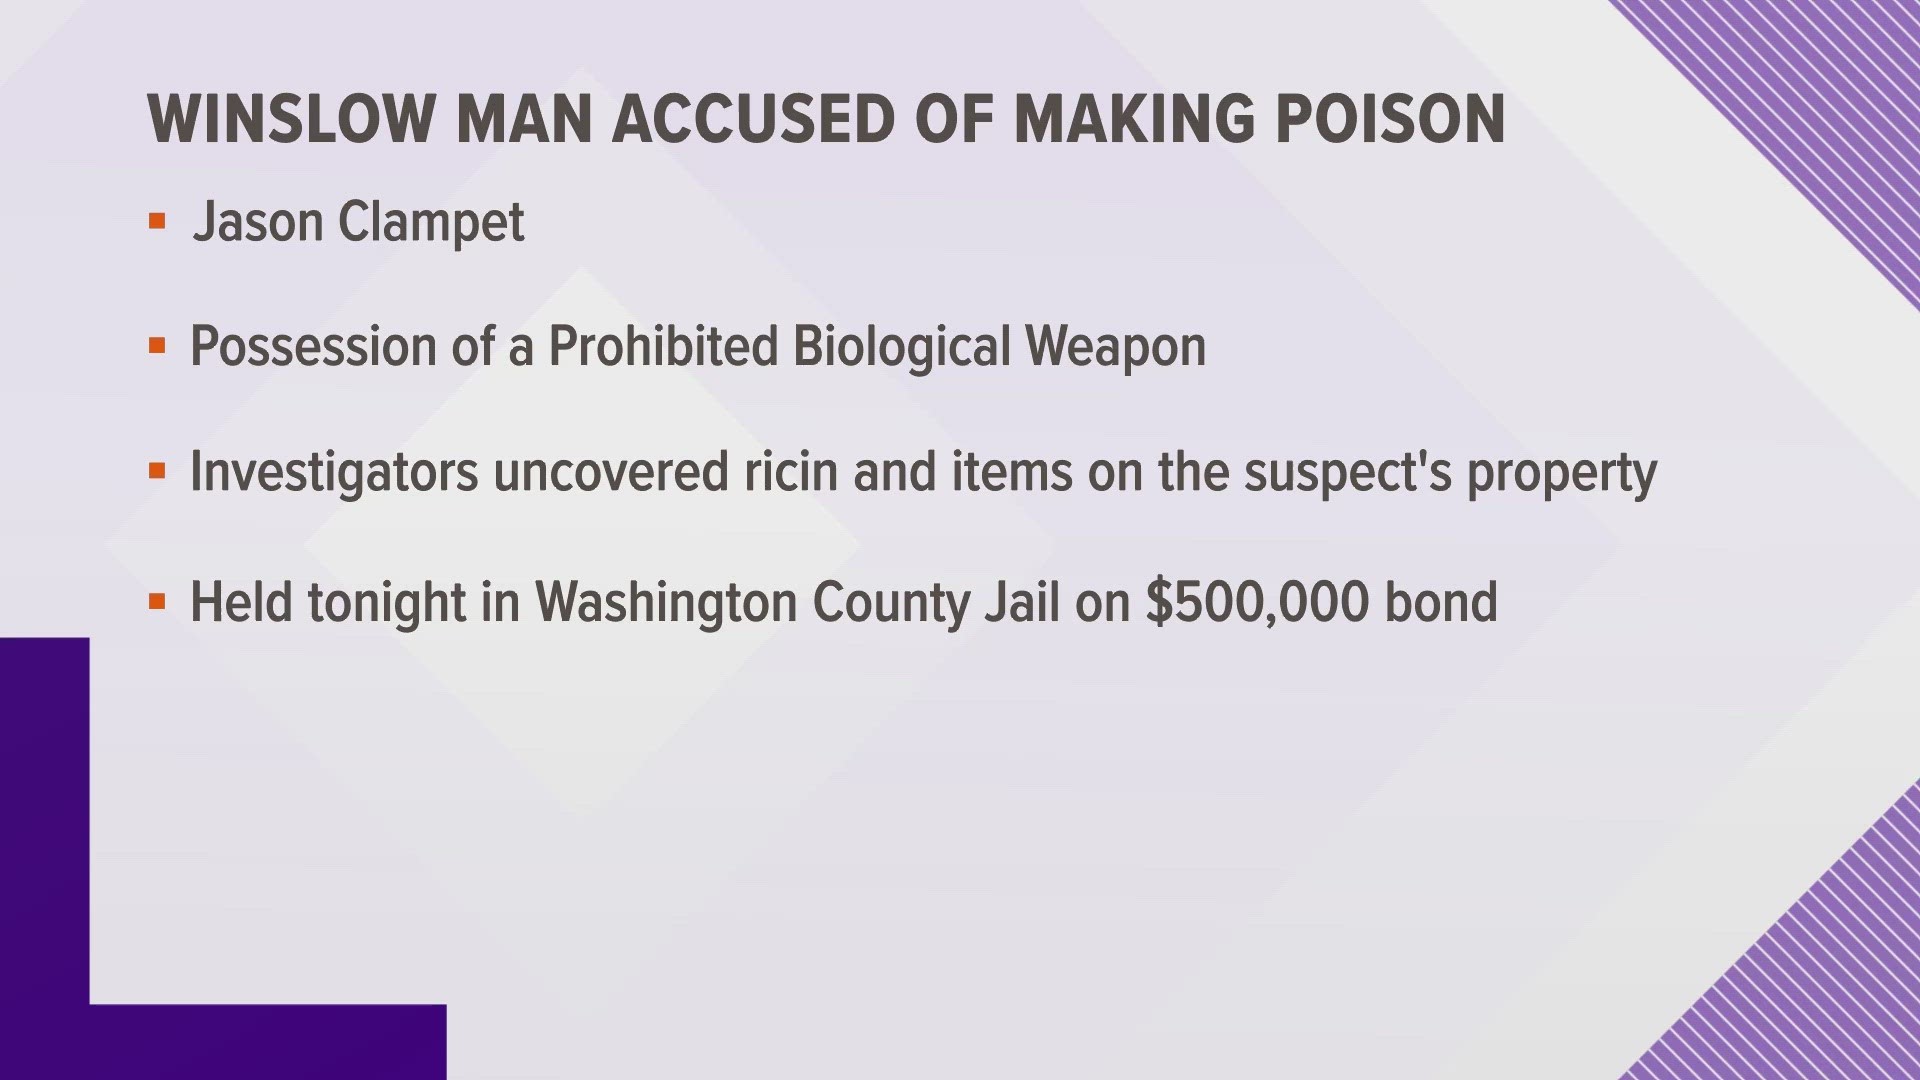 A WASHINGTON COUNTY MAN IS ACCUSED OF MAKING RICIN - A DEADLY POISON...